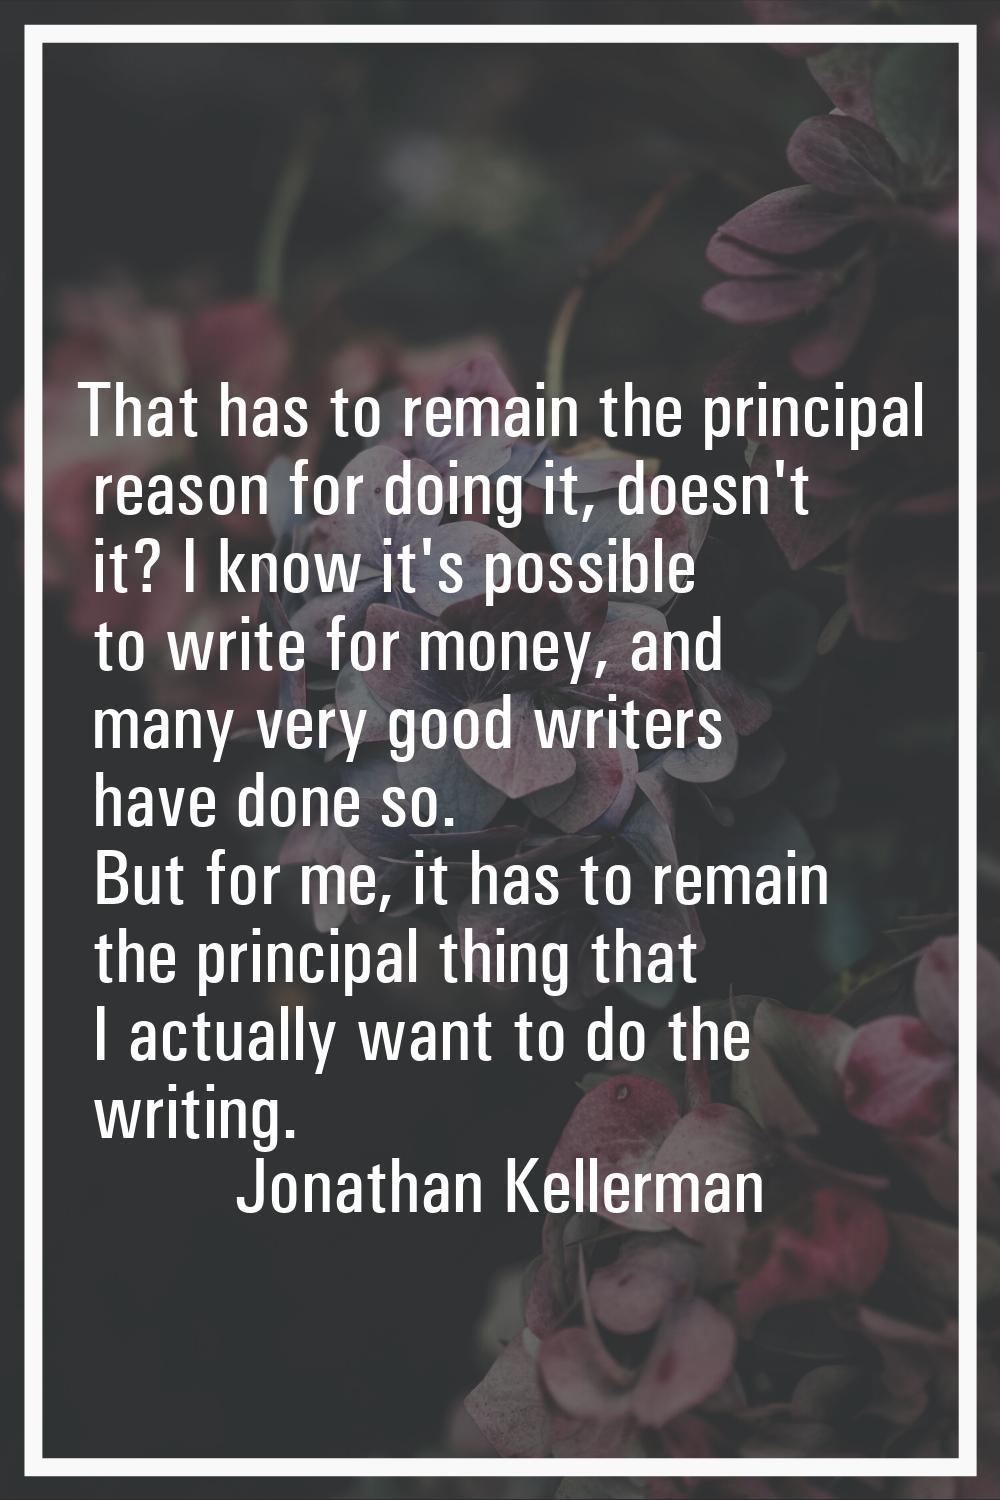 That has to remain the principal reason for doing it, doesn't it? I know it's possible to write for